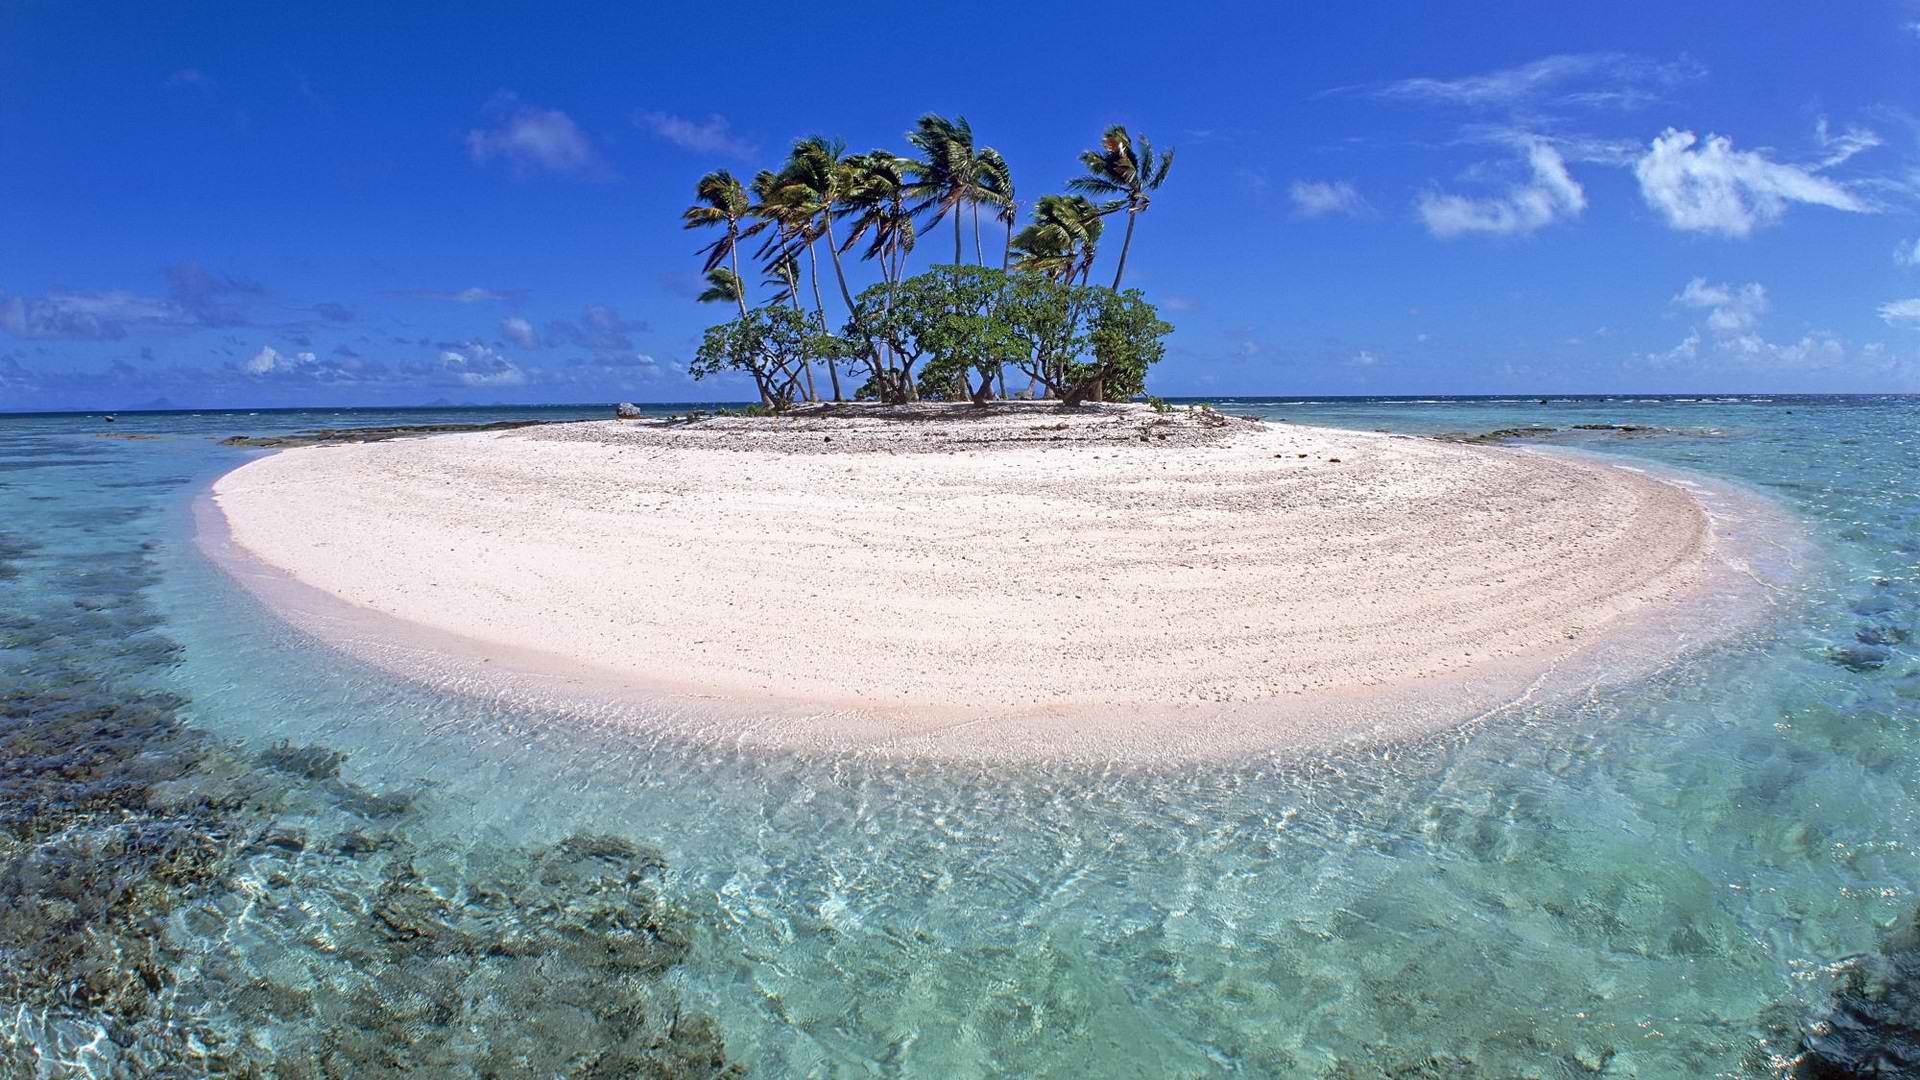 A small island with trees wallpapers and images  wallpapers, pictures, photos